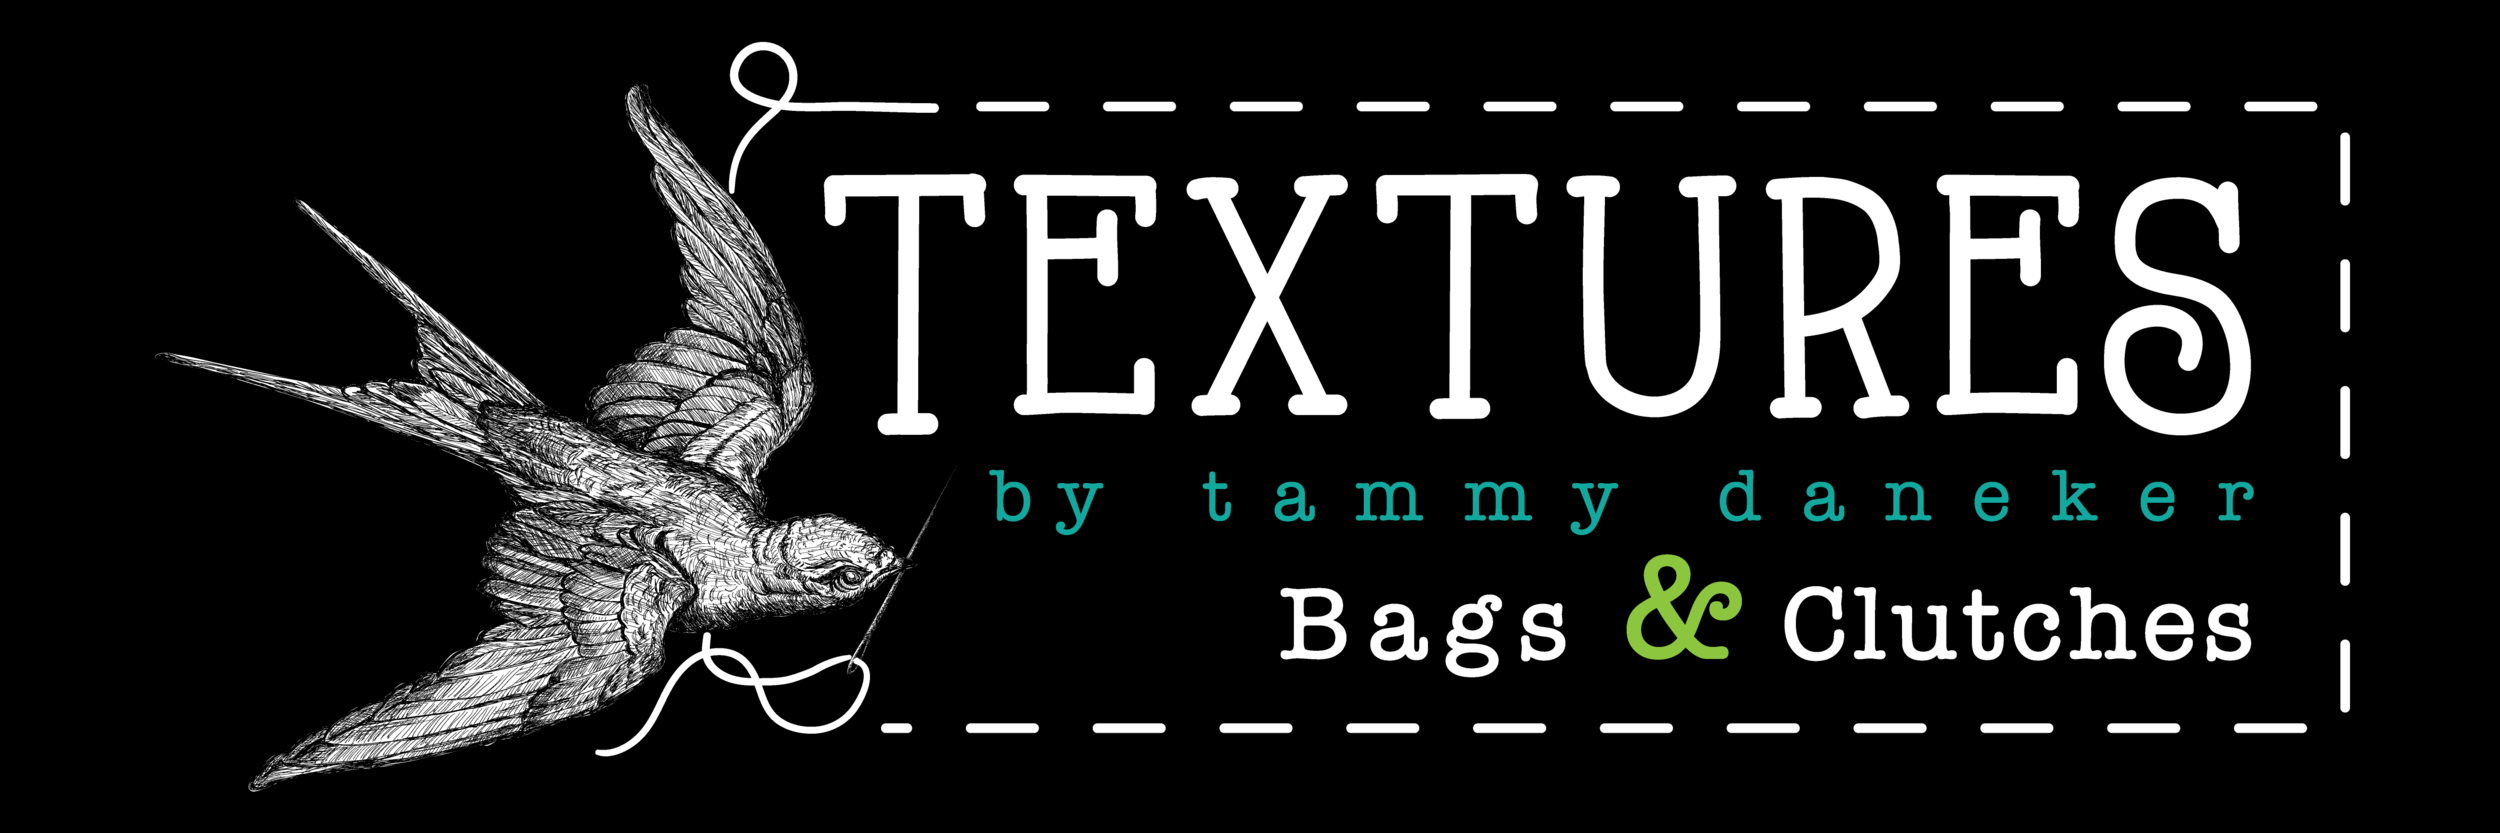 Textures Bags & Clutches